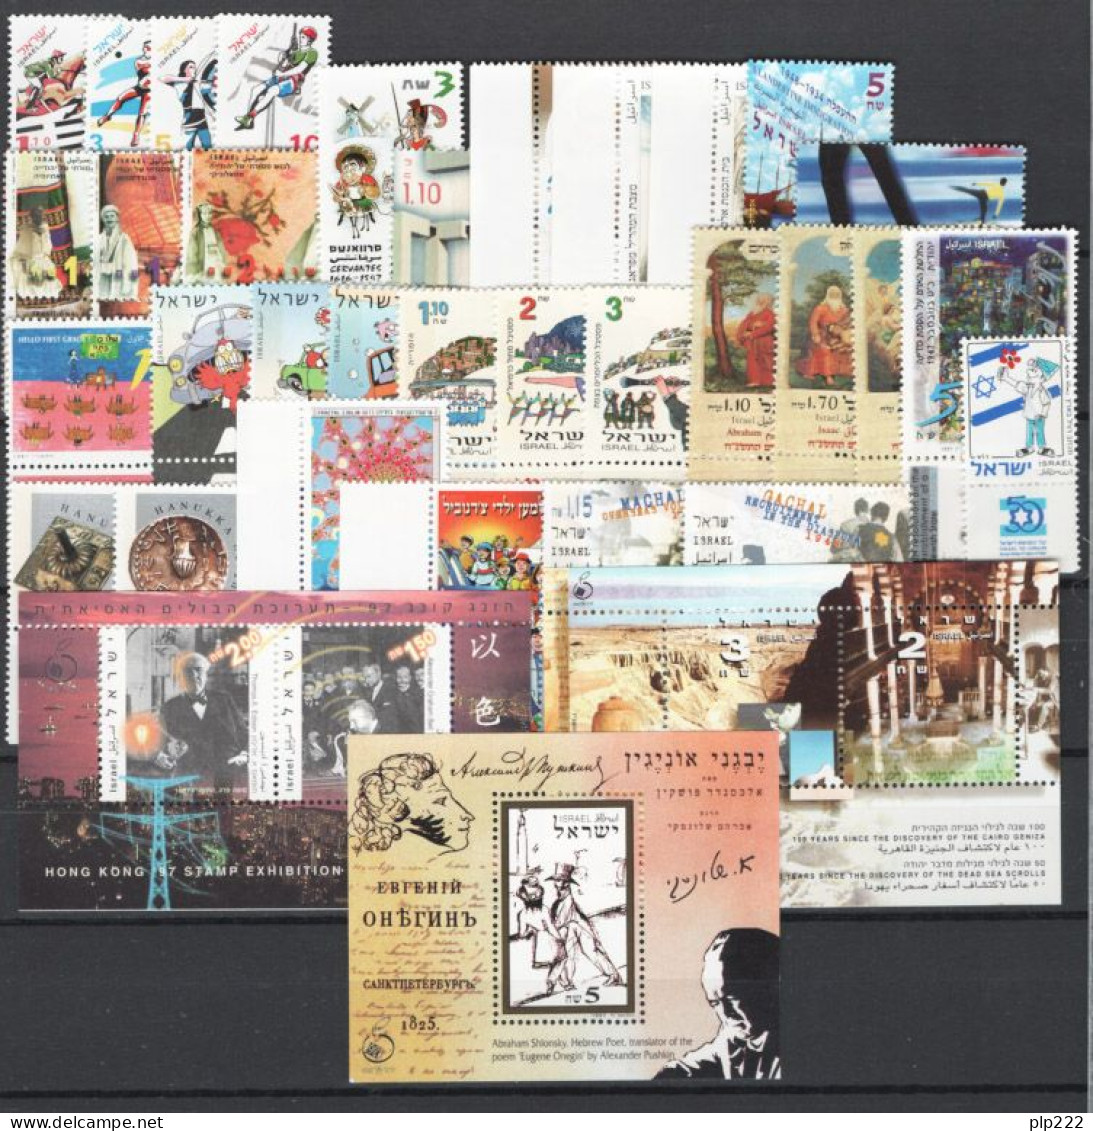 Israele 1997 Annata Completa Con Appendice / Complete Year Set With Tab **/MNH VF - Années Complètes